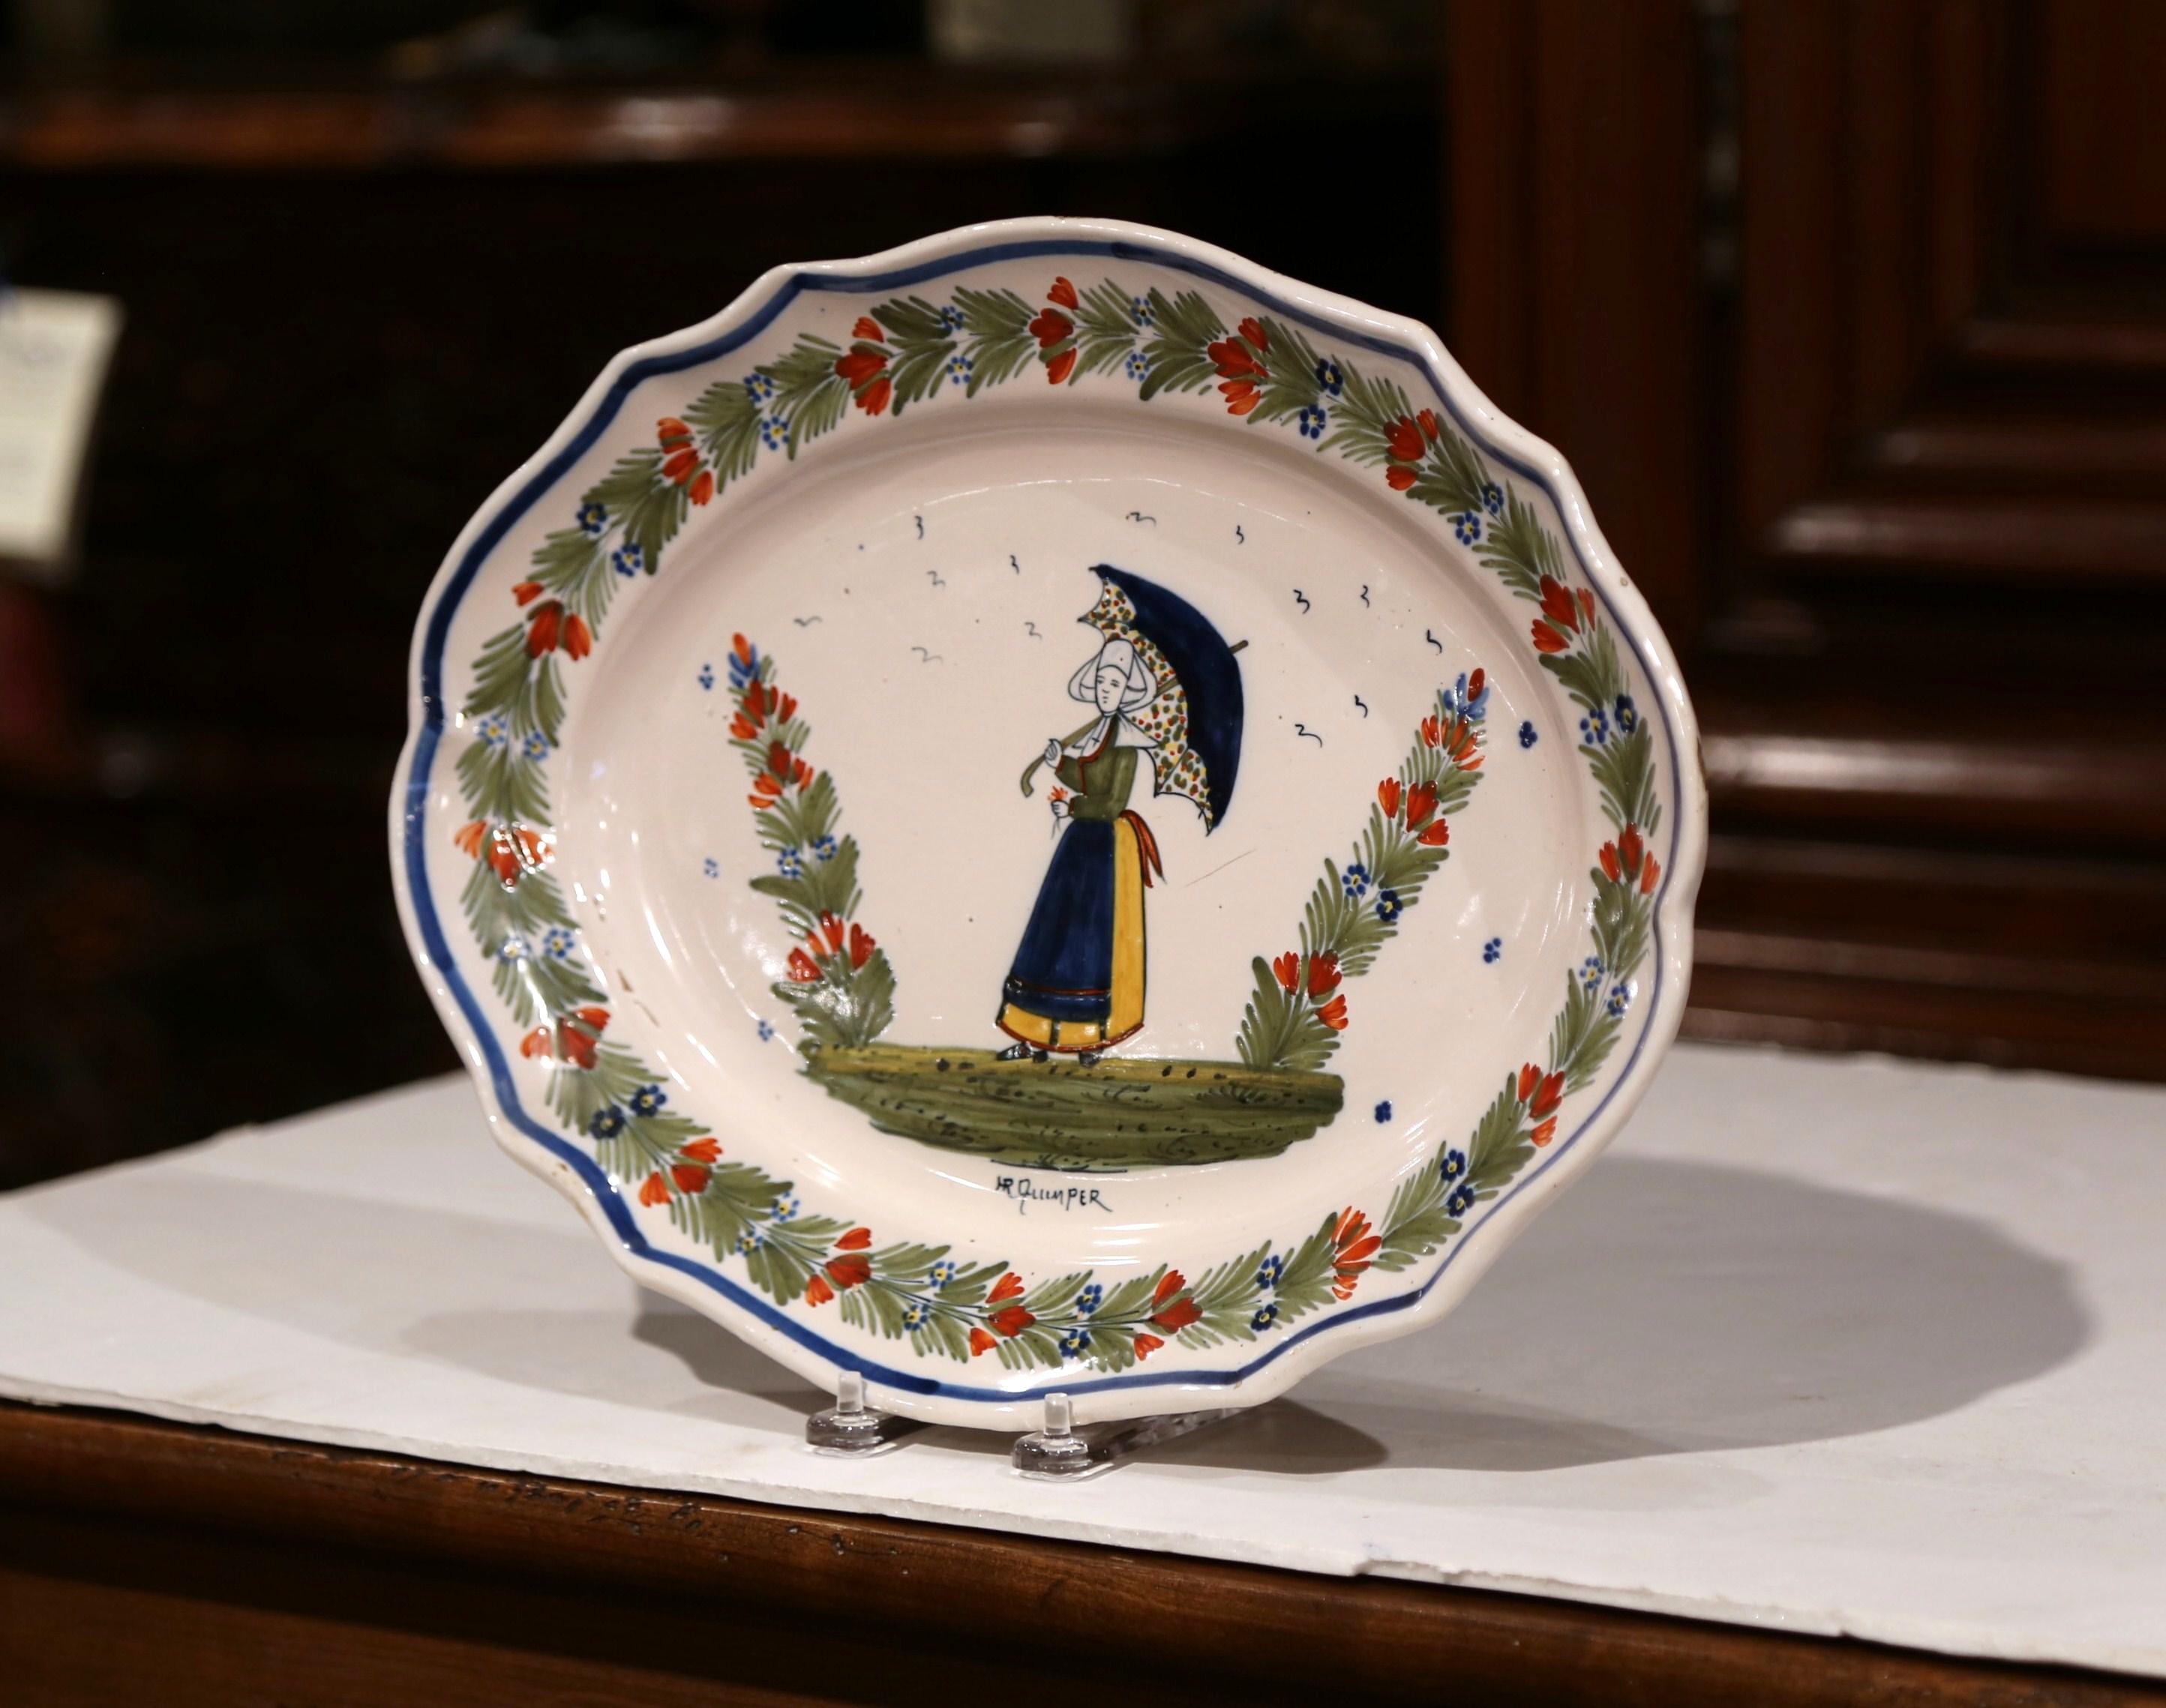 This colorful ceramic wall plate was created in Brittany, France, circa 1904-1922. Oval in shape, the faience platter features hand painted decor including a traditional Breton woman figure dressed in authentic costume and holding an umbrella. The